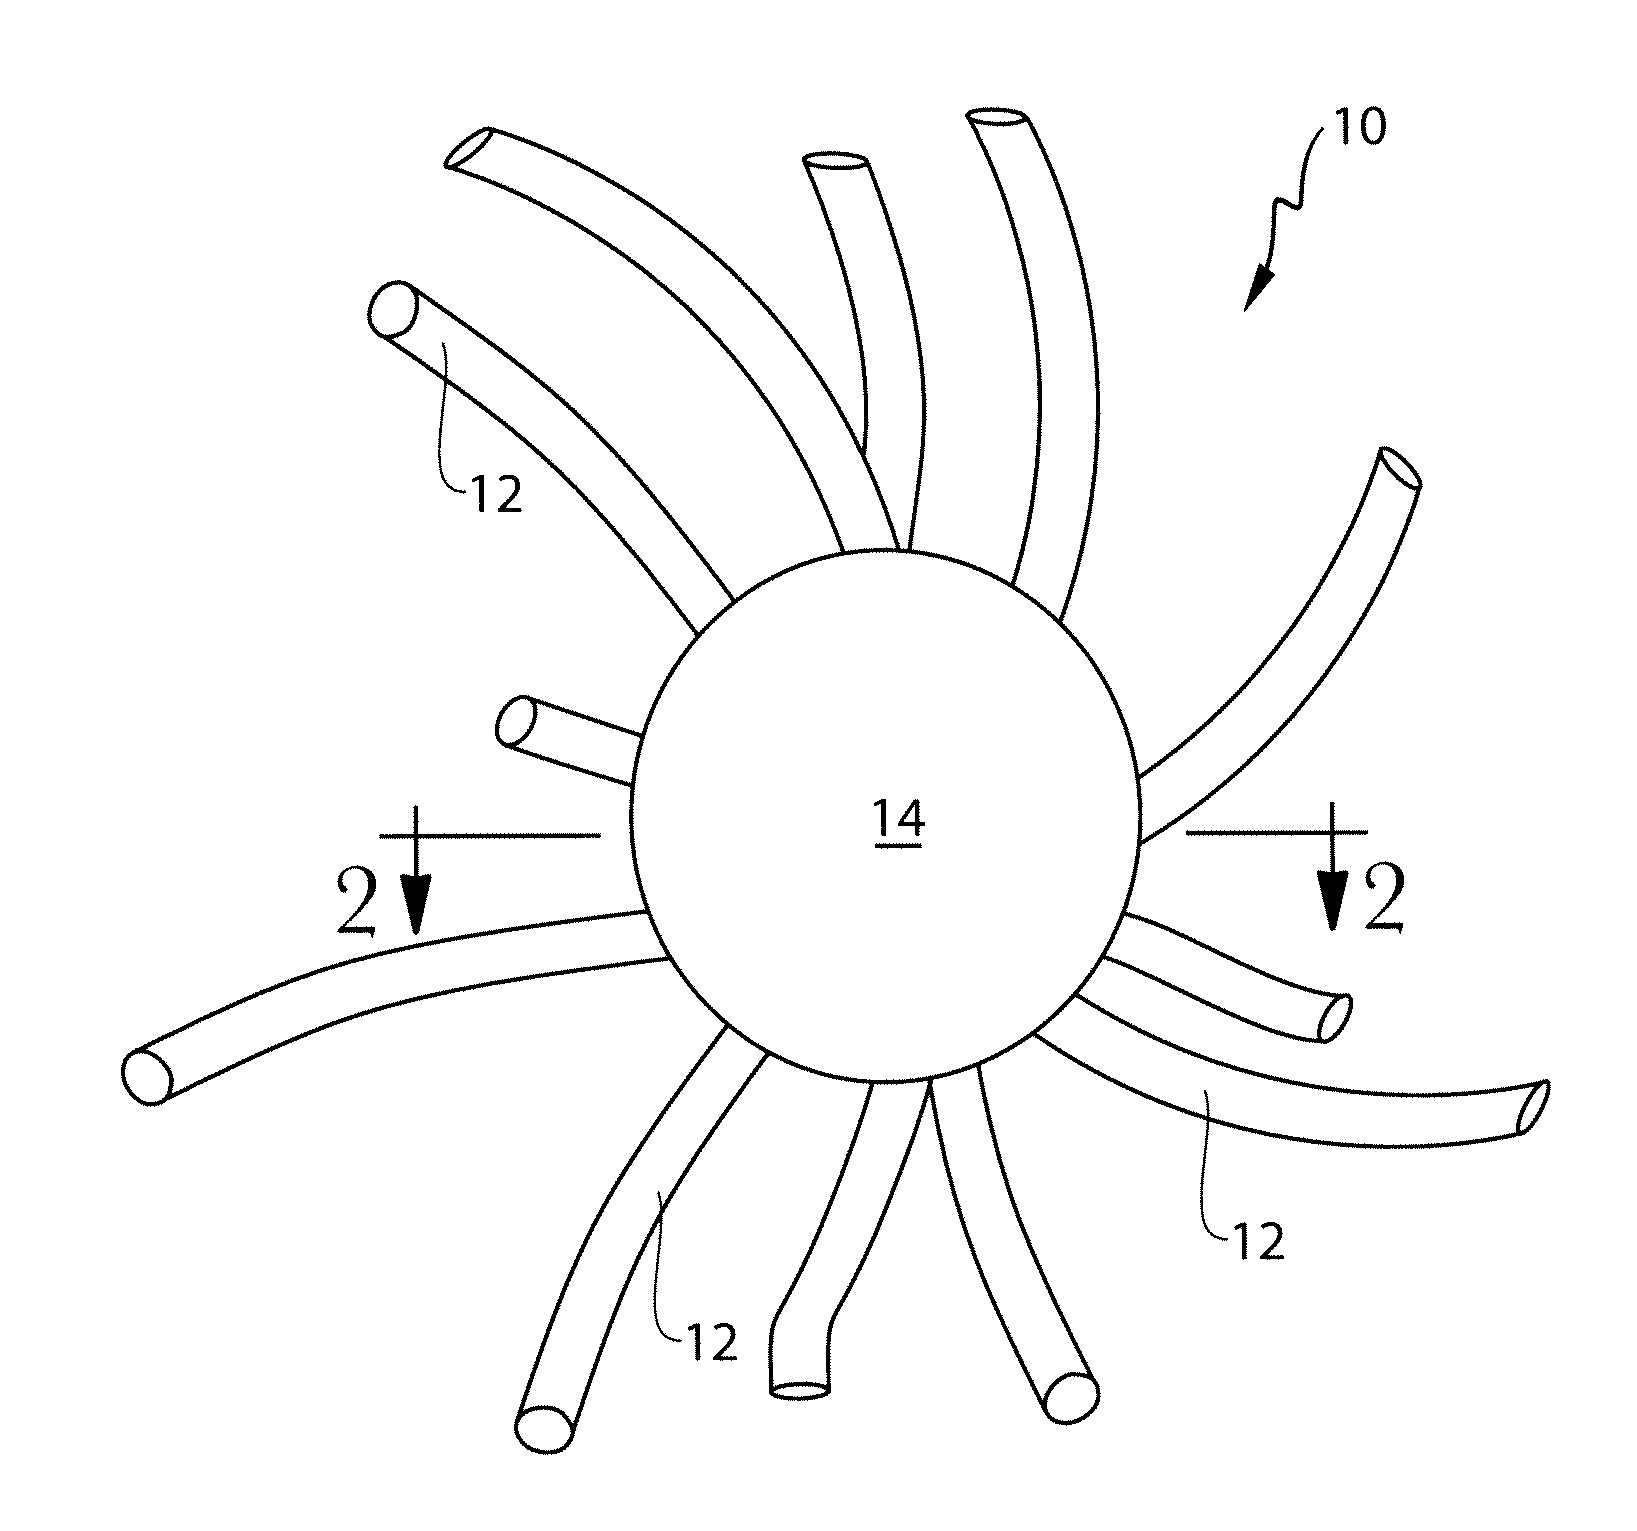 Filaments comprising an active agent nonwoven webs and methods for making same